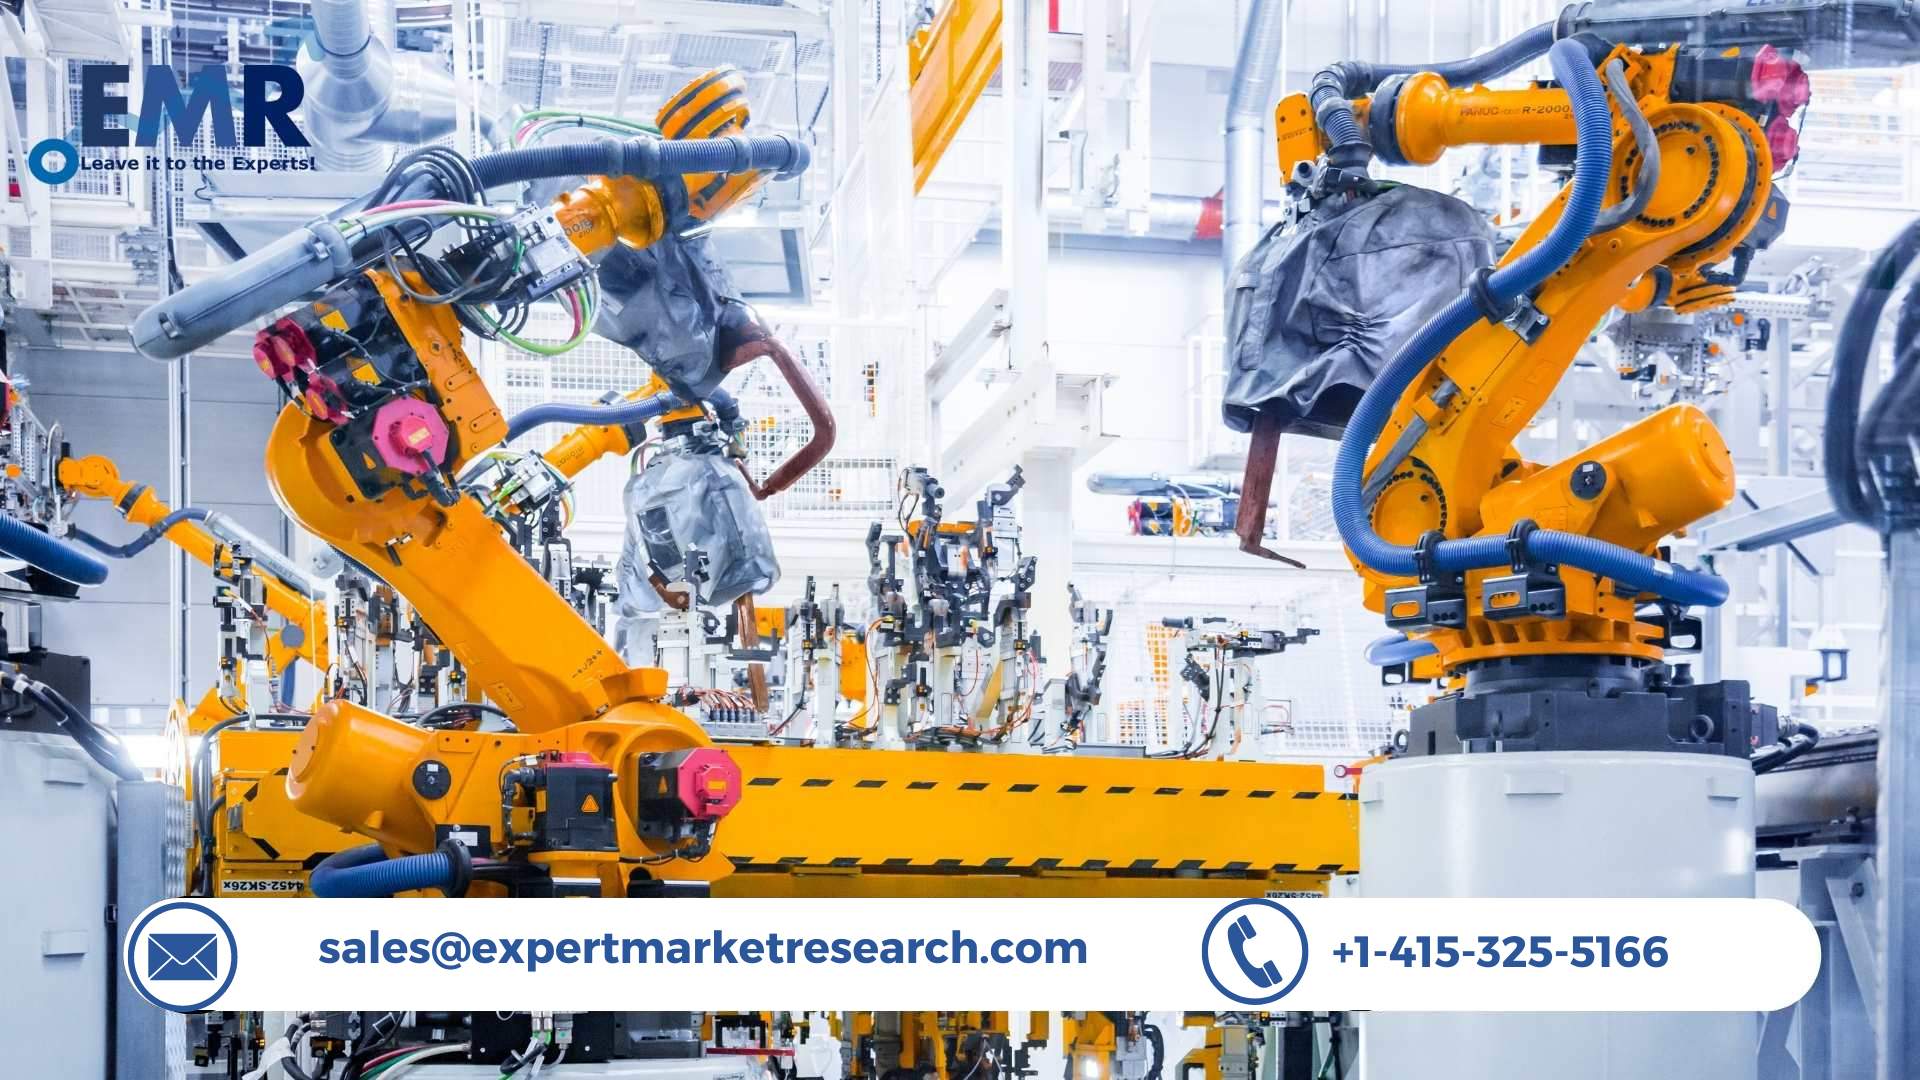 Global Automotive Robotics Market To Be Driven By Rising Number Of Automated Manufacturing Hubs Across The Globe In The Forecast Period Of 2023-2028 | EMR Inc.